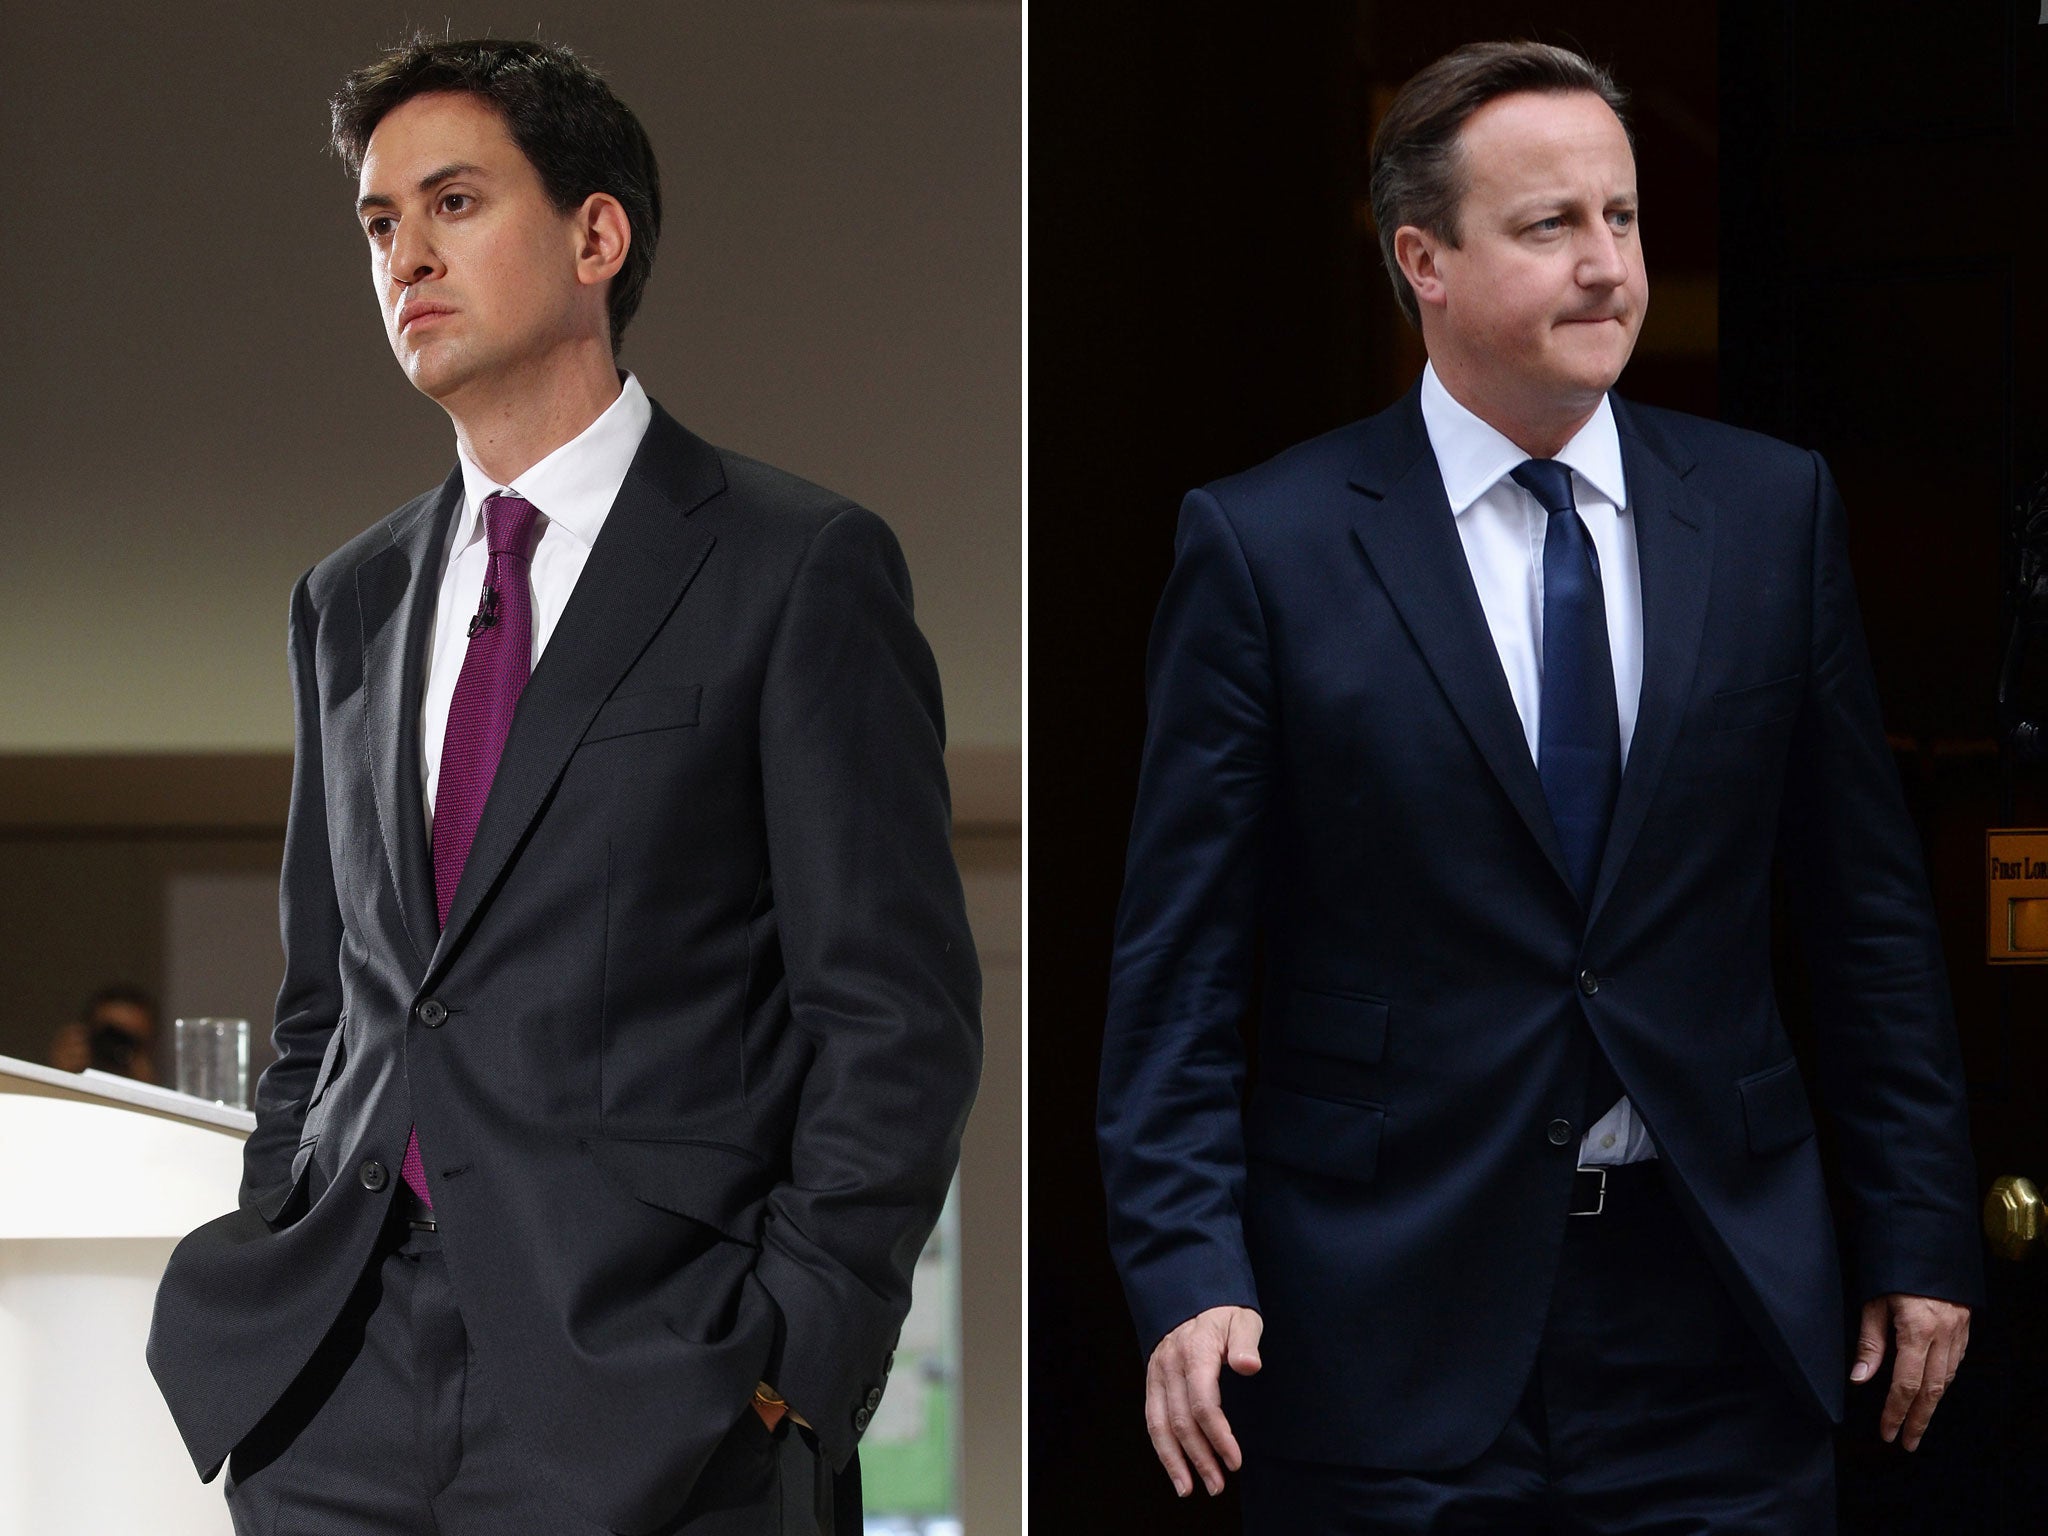 The latest ComRes opinion poll shows that voters have a low opinion of both potential prime ministers: a mere 25 per cent saying they have a “favourable” view of David Cameron and just 19 per cent saying the same of Ed Miliband